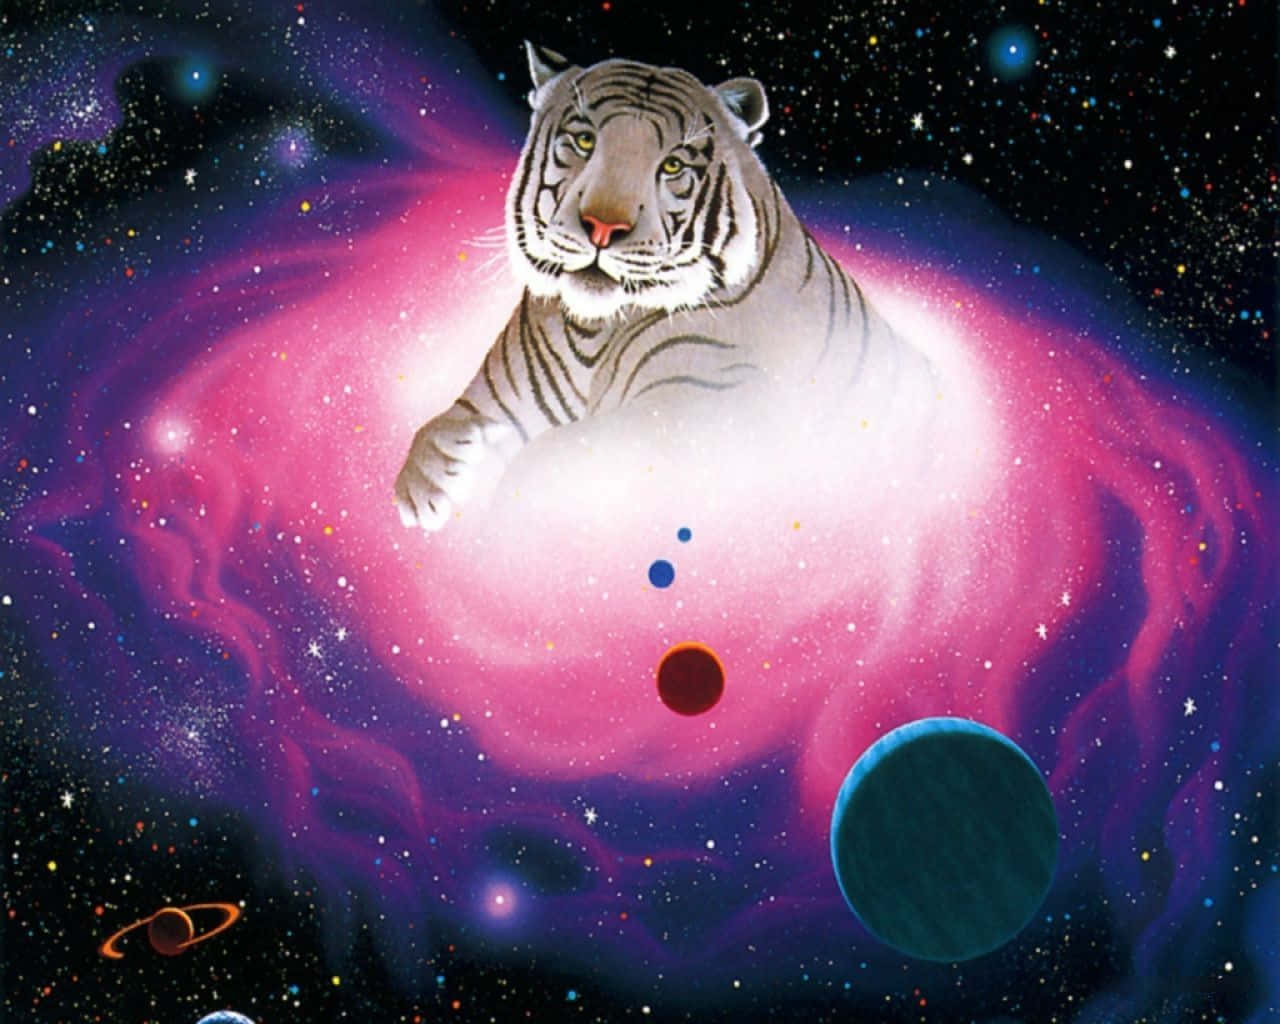 A mesmerizing mix of colors - the beautiful Tiger Galaxy Wallpaper